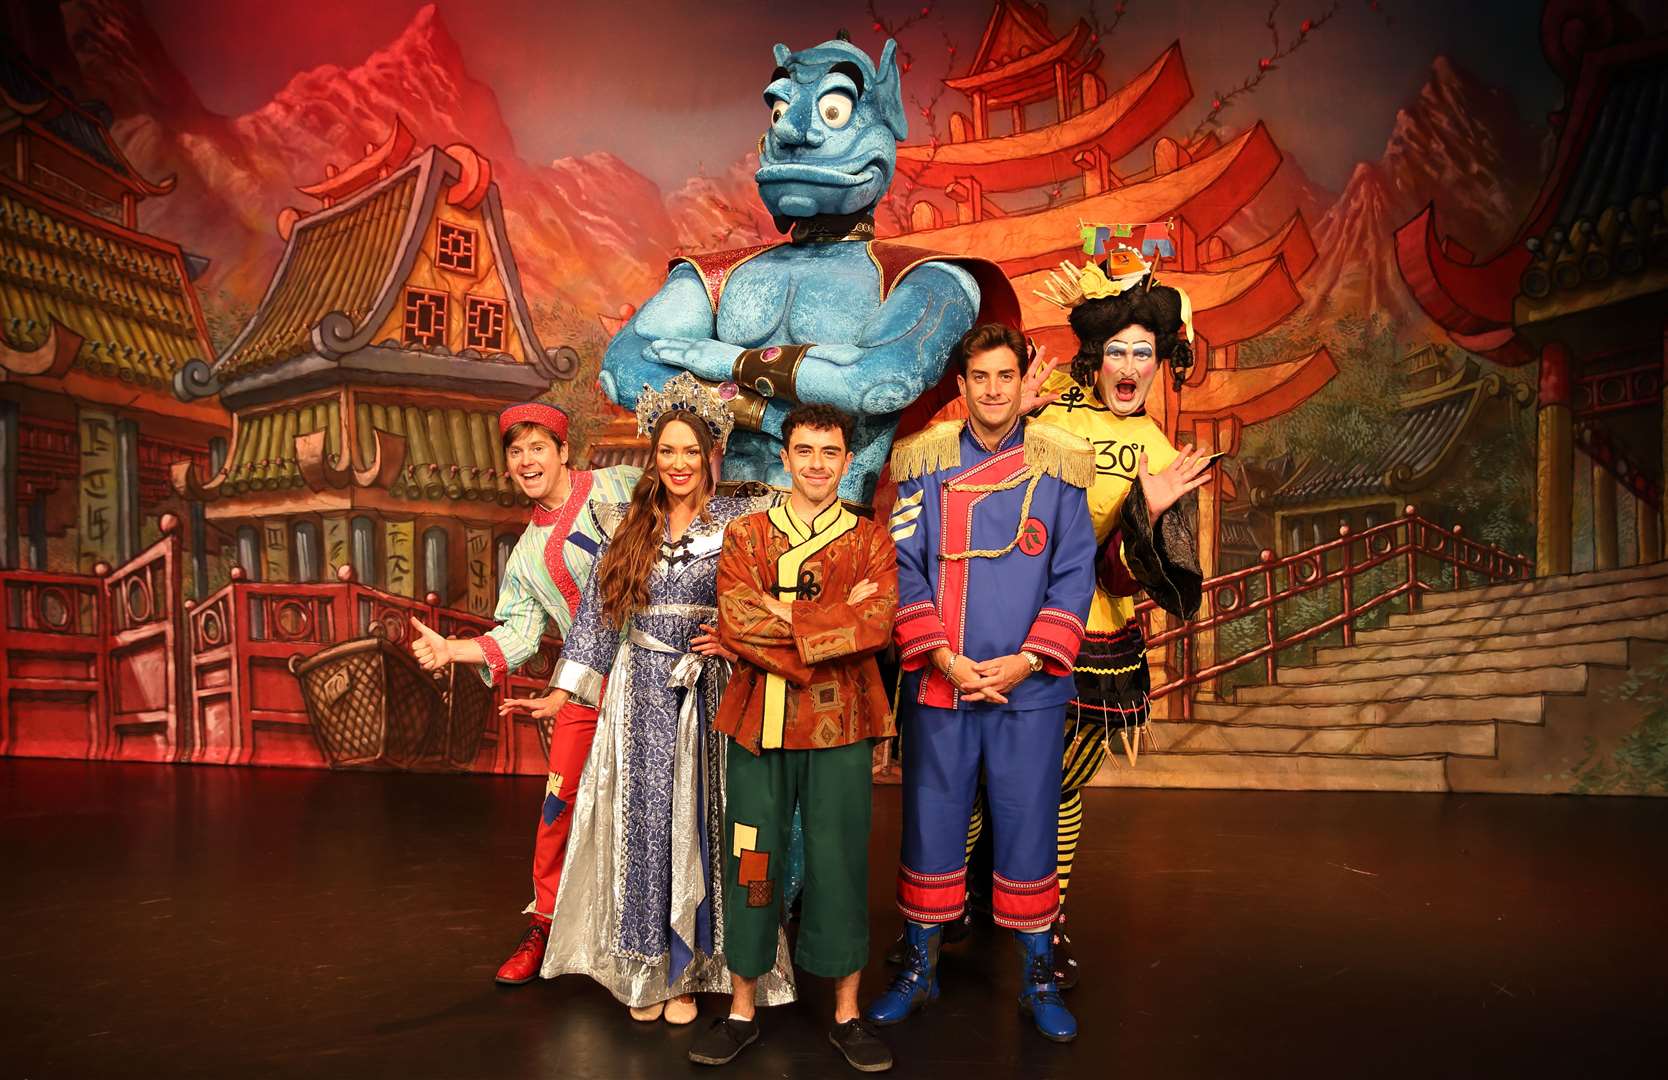 The cast of Aladdin, including TOWIE star James ‘Arg’ Argent, at Gravesend's Woodville. Picture: John Nurden